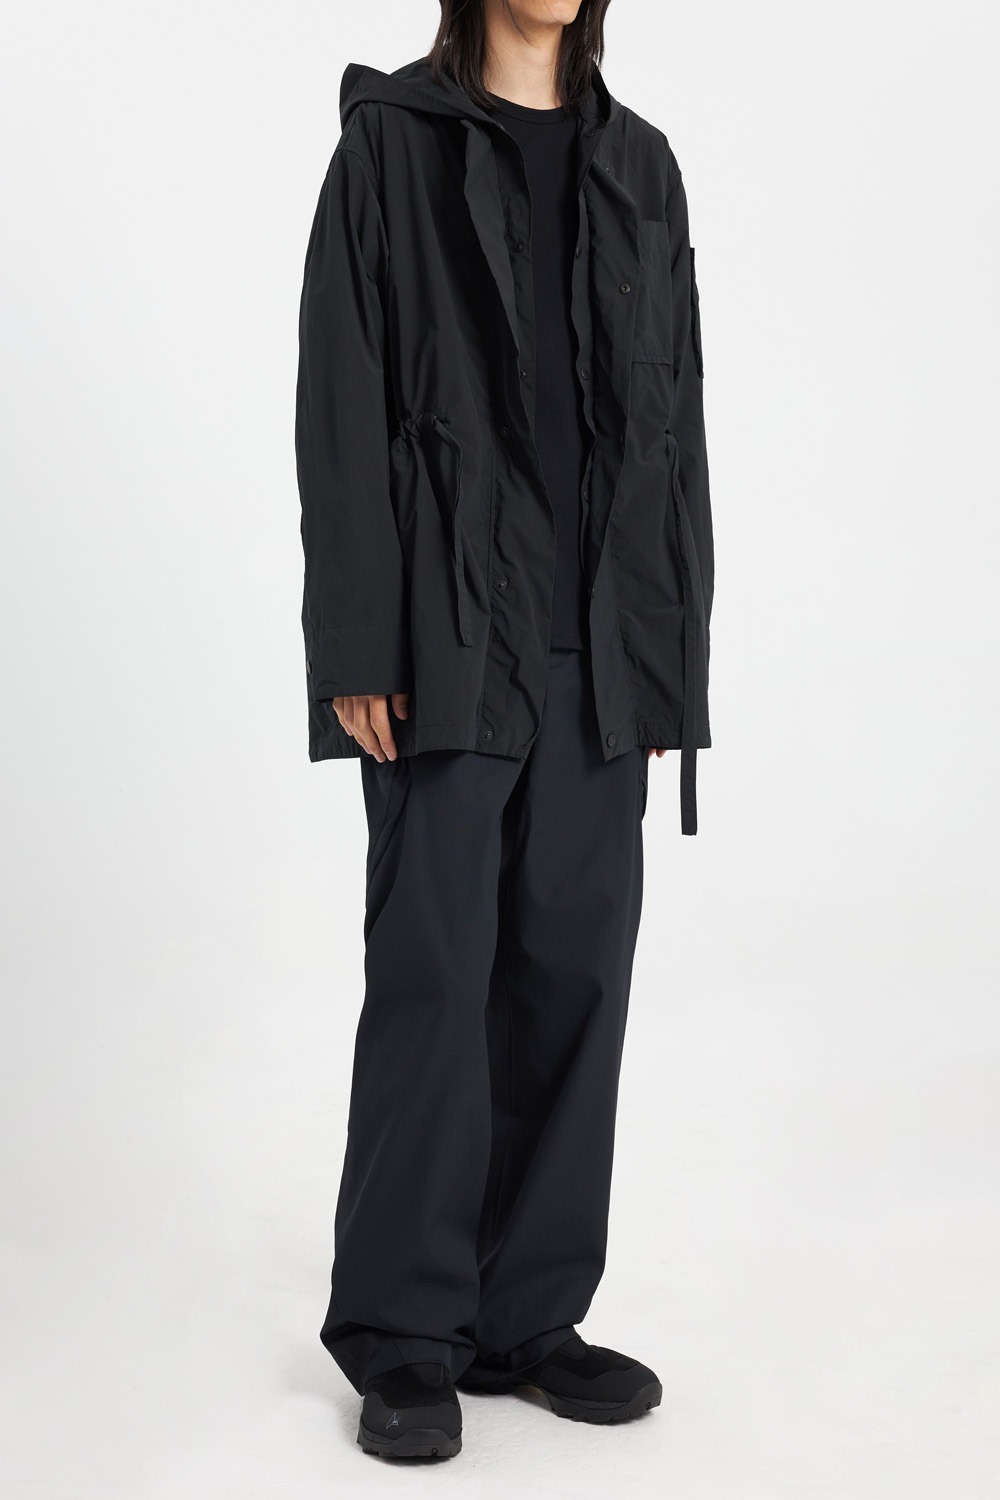 Product Dyed Hooded Blouson_Black